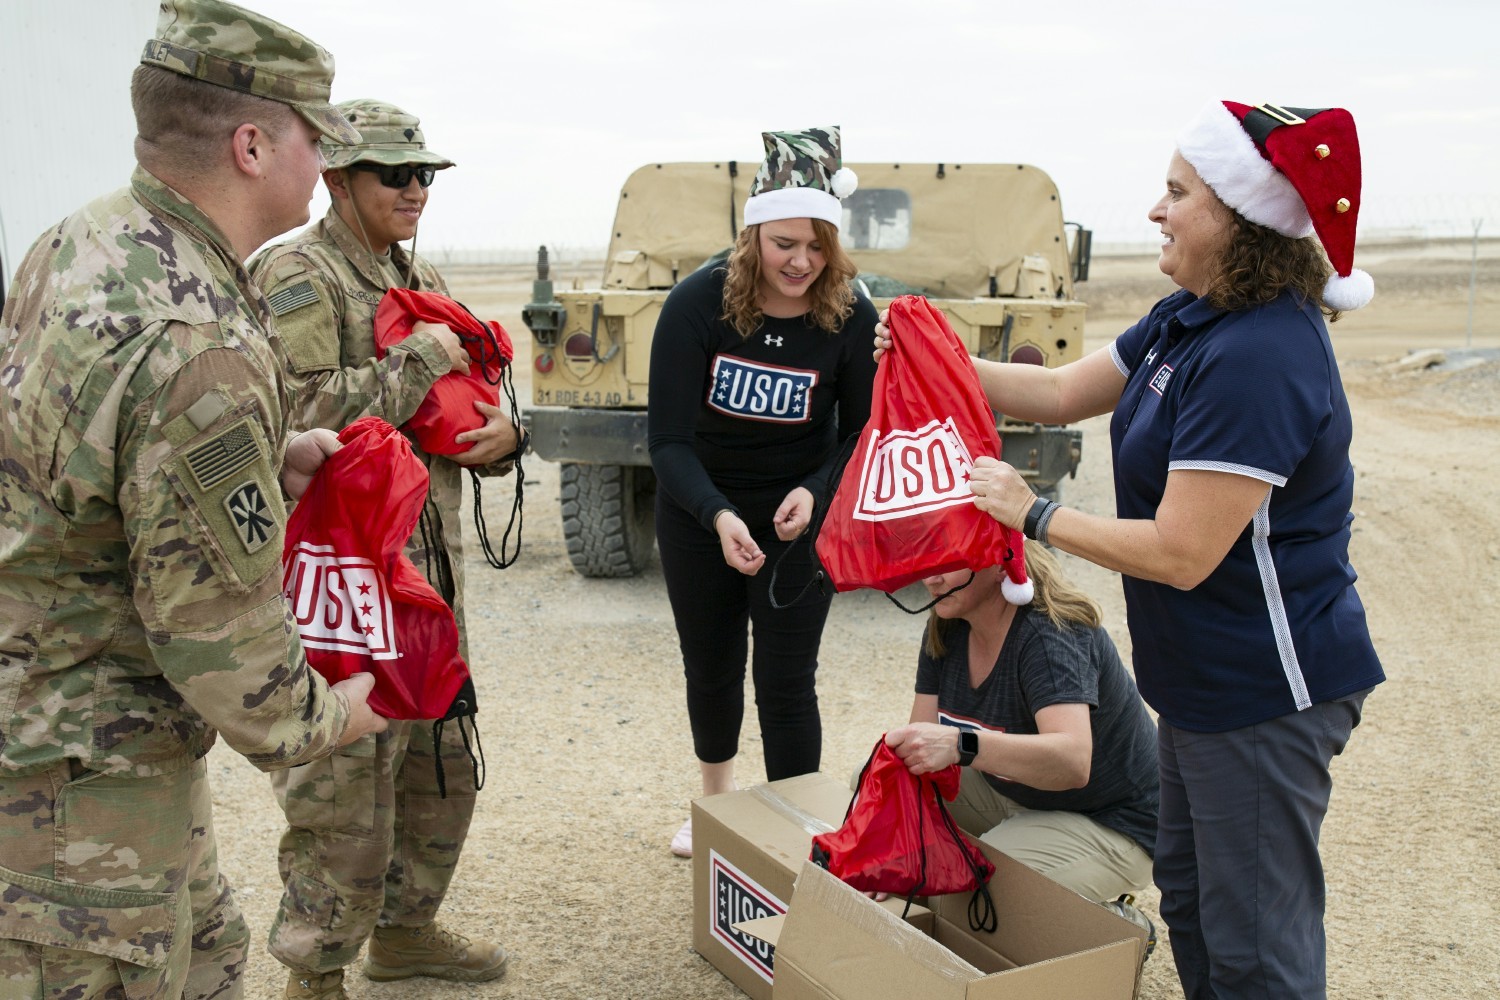 Bringing some holiday cheer to service members away from their families. 